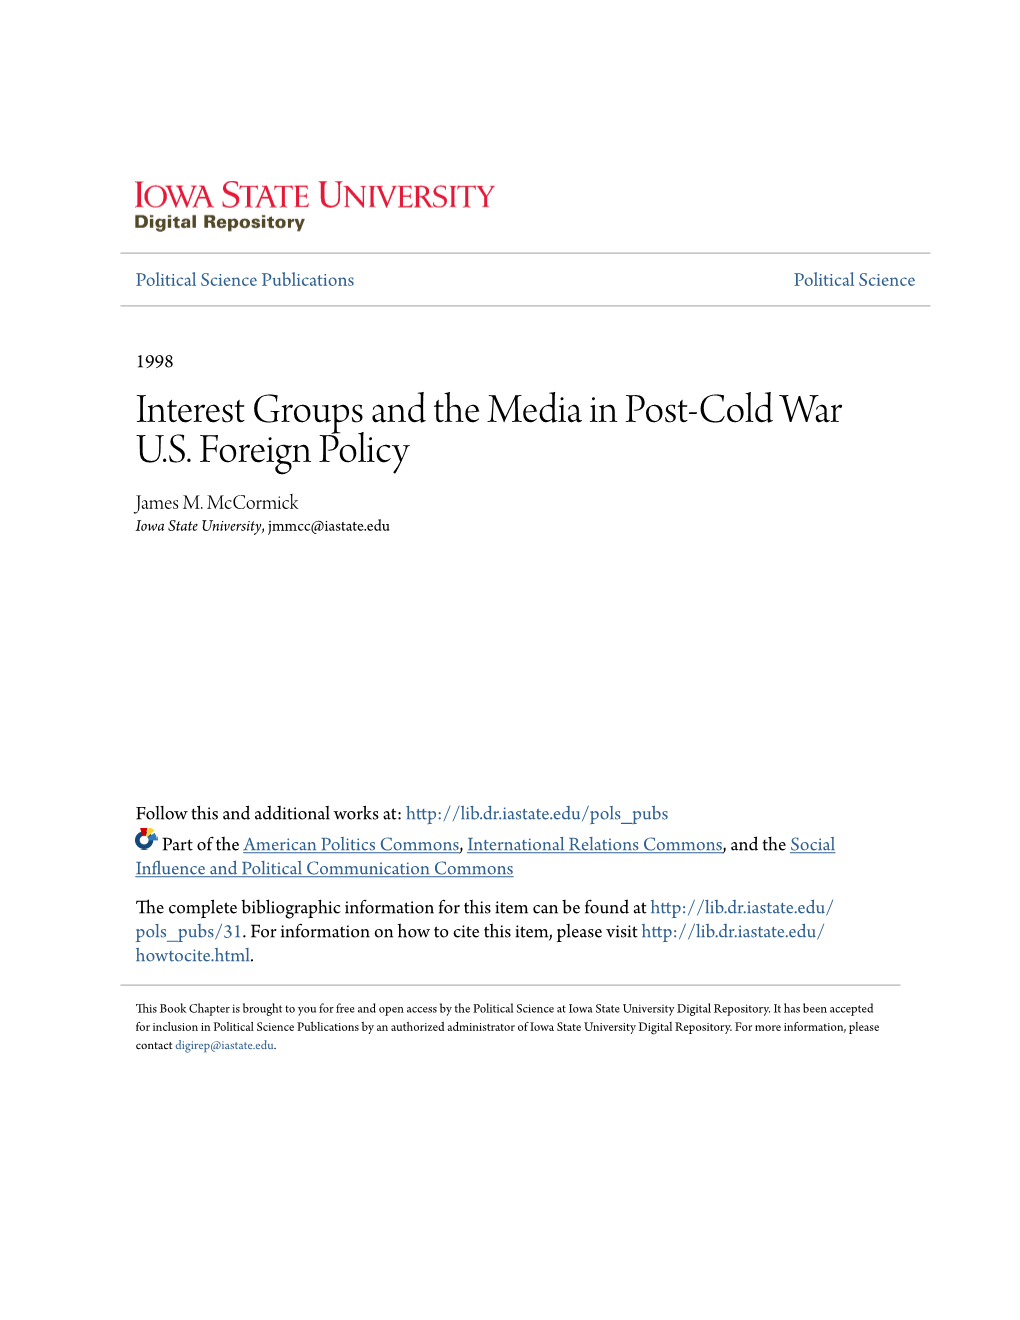 Interest Groups and the Media in Post-Cold War U.S. Foreign Policy James M